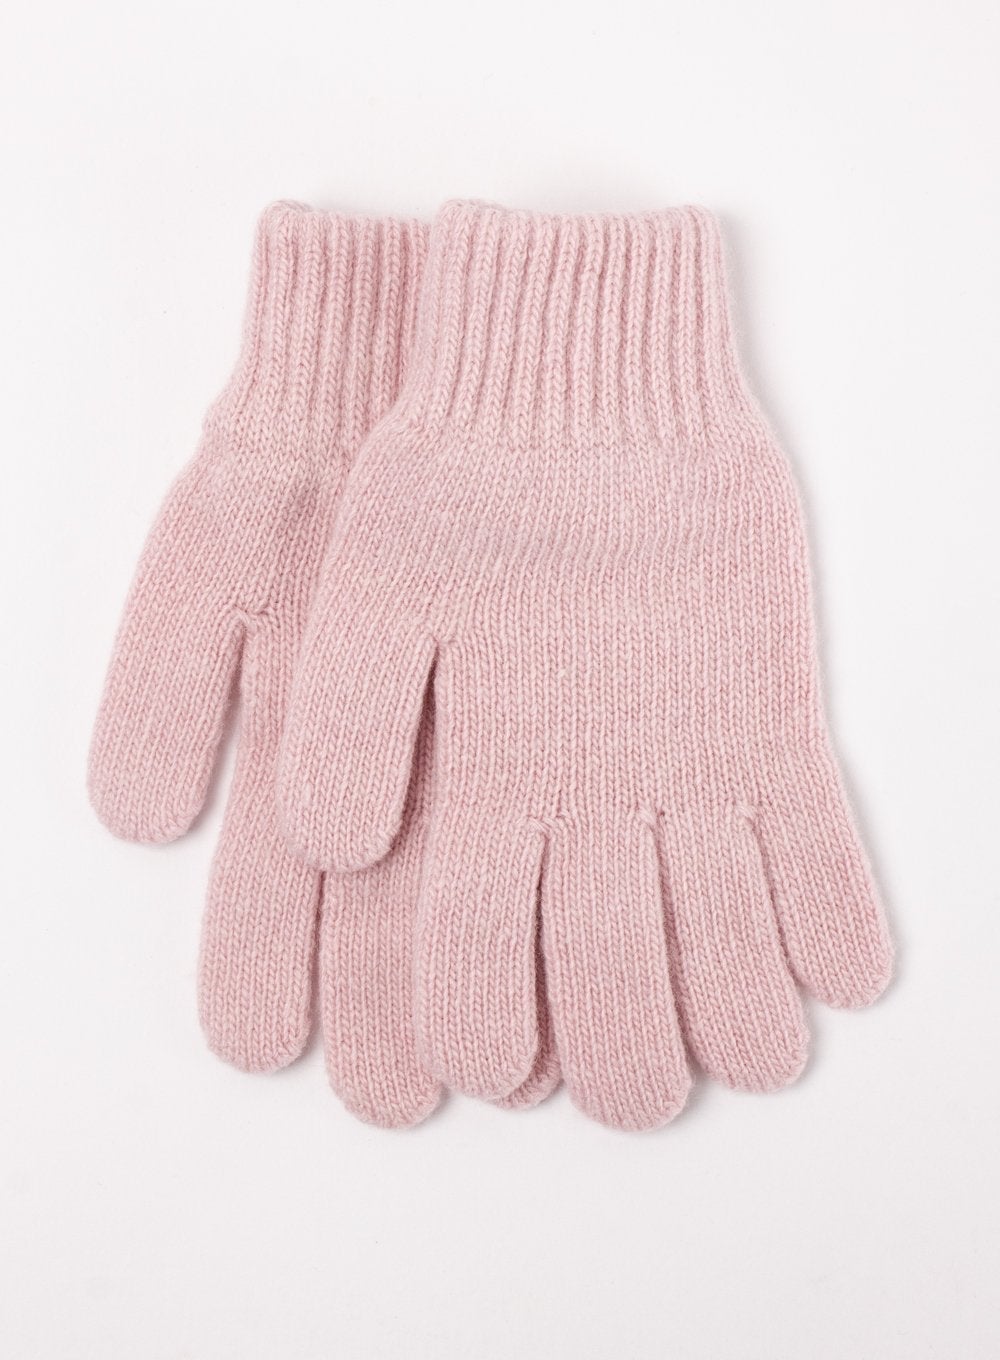 Chelsea Clothing Company Gloves Gloves in Pale Pink